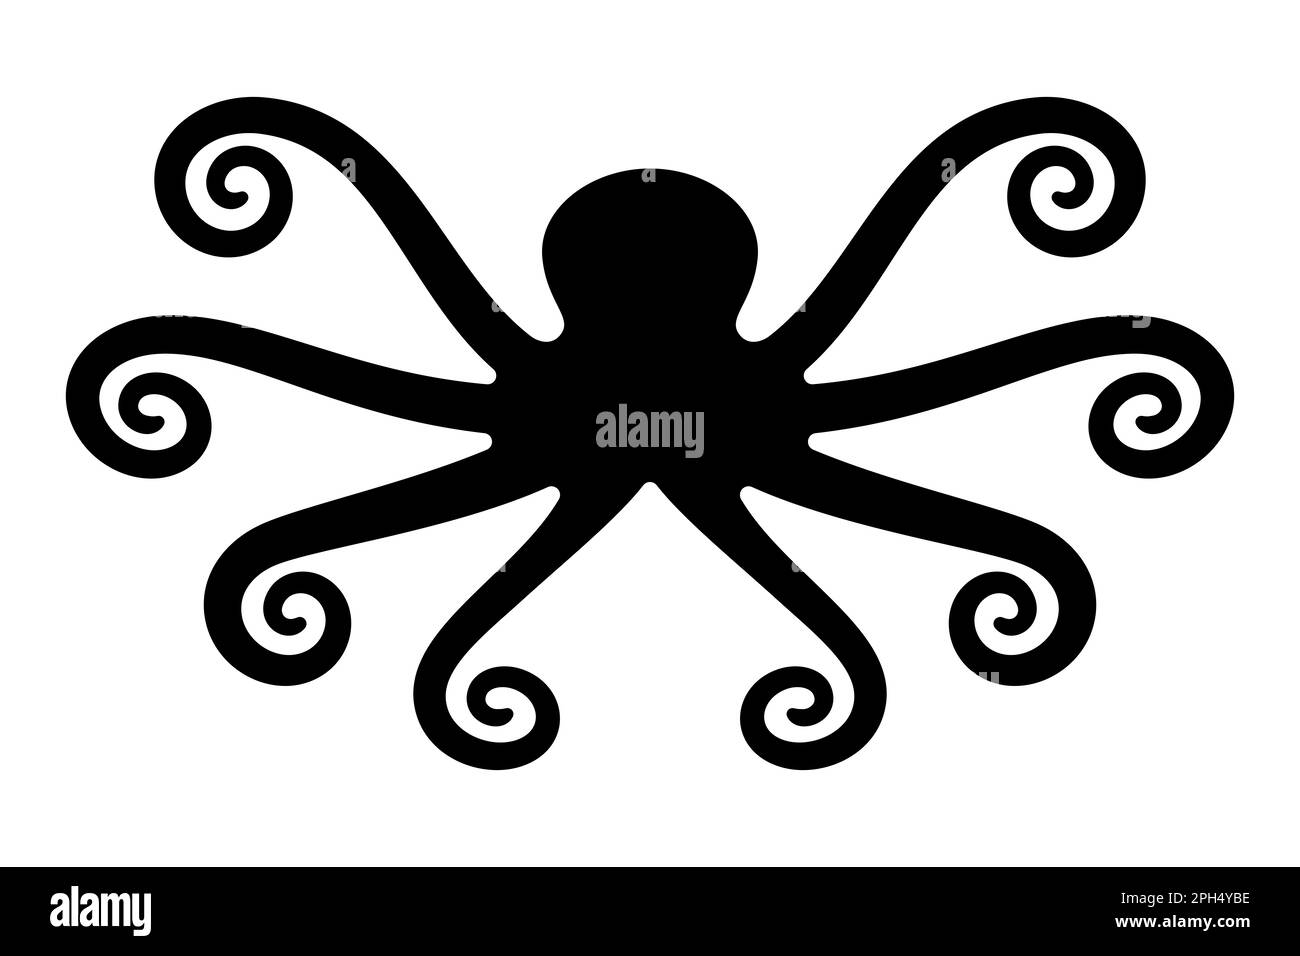 Kraken, symbol for a legendary sea monster, an octopus or polypus of enormous size with eight tentacles. Also a synonym for insatiable greed. Stock Photo